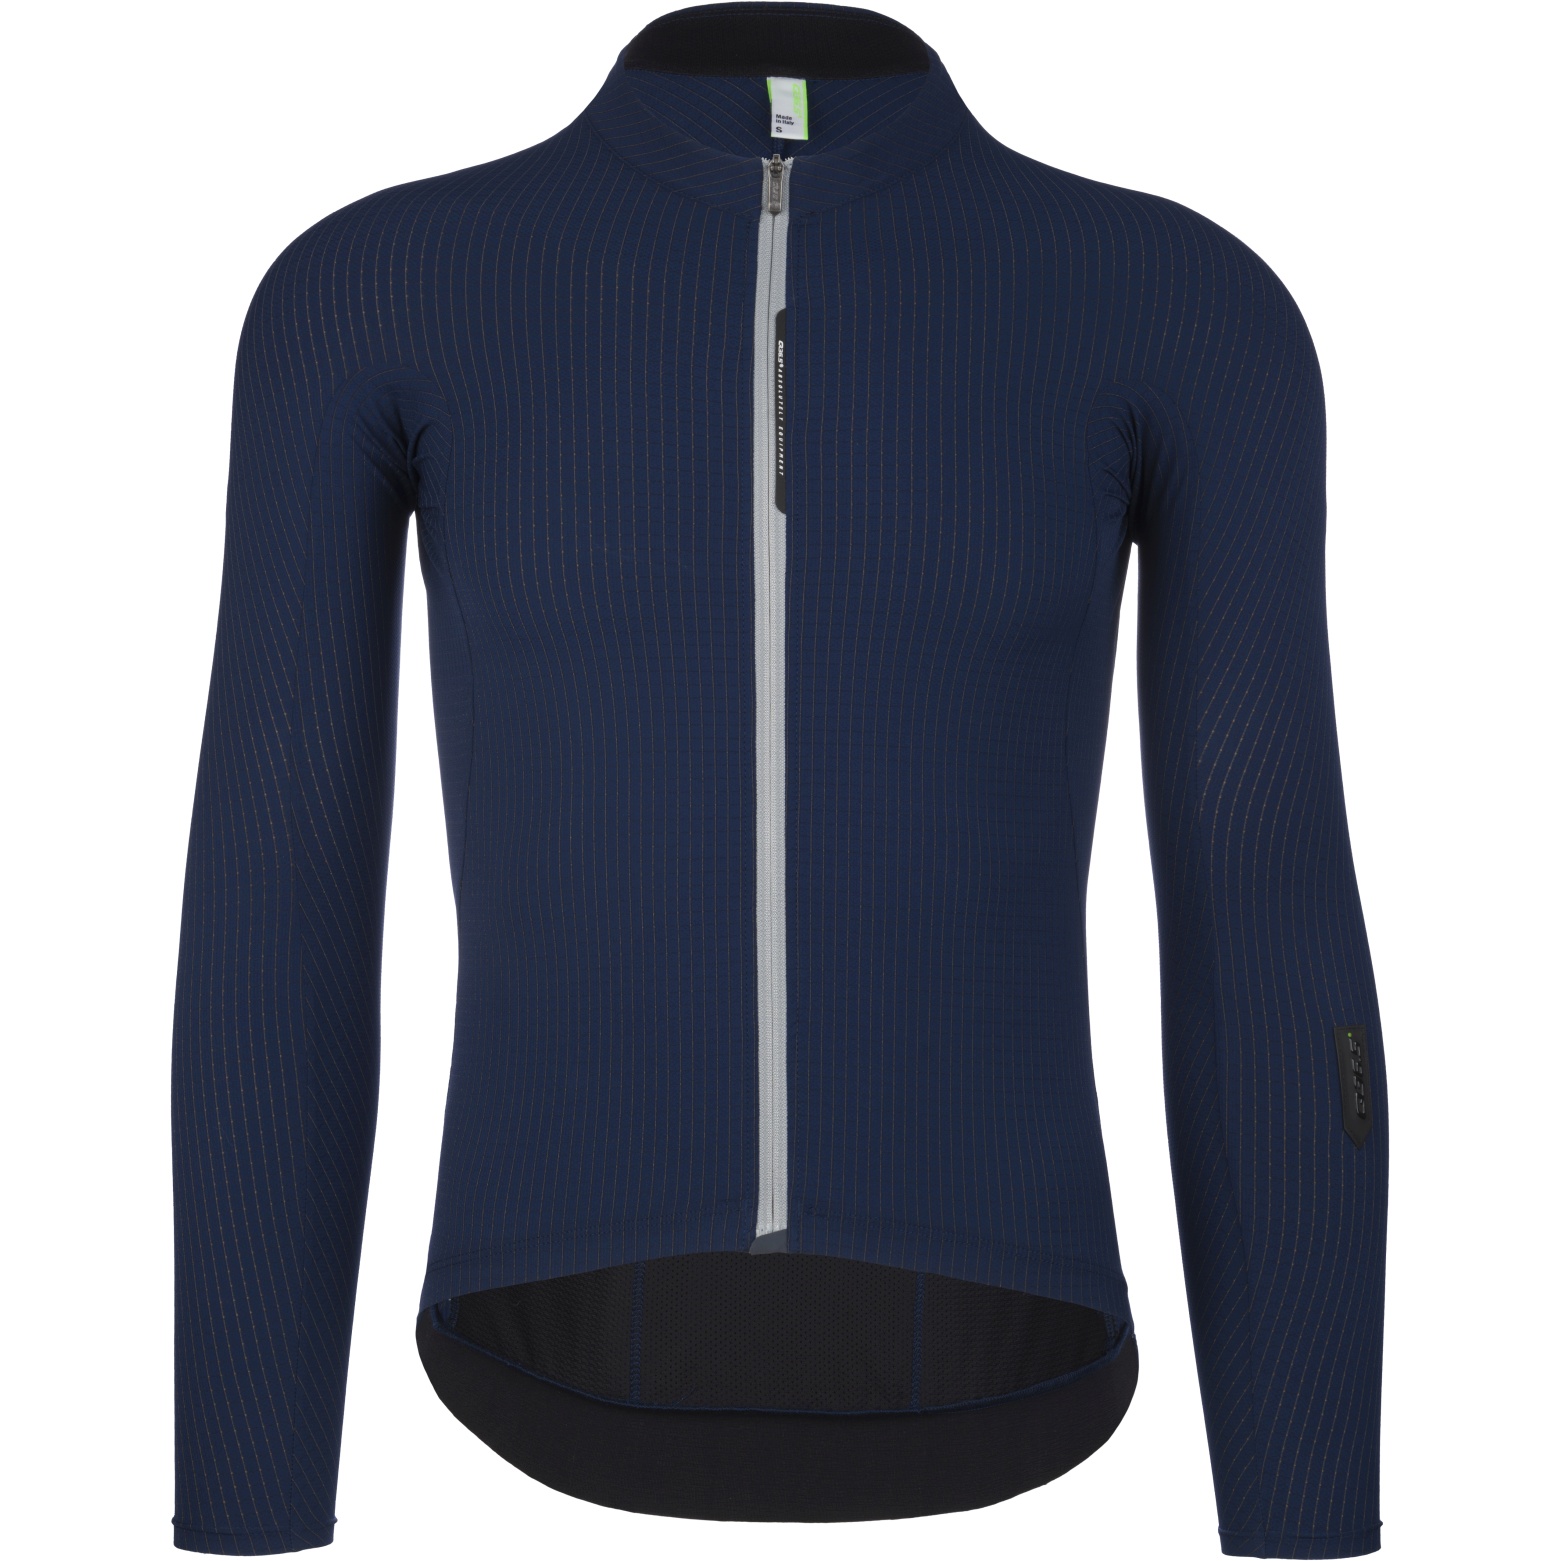 Picture of Q36.5 L1 Long Sleeve Jersey Men - pinstripe x navy